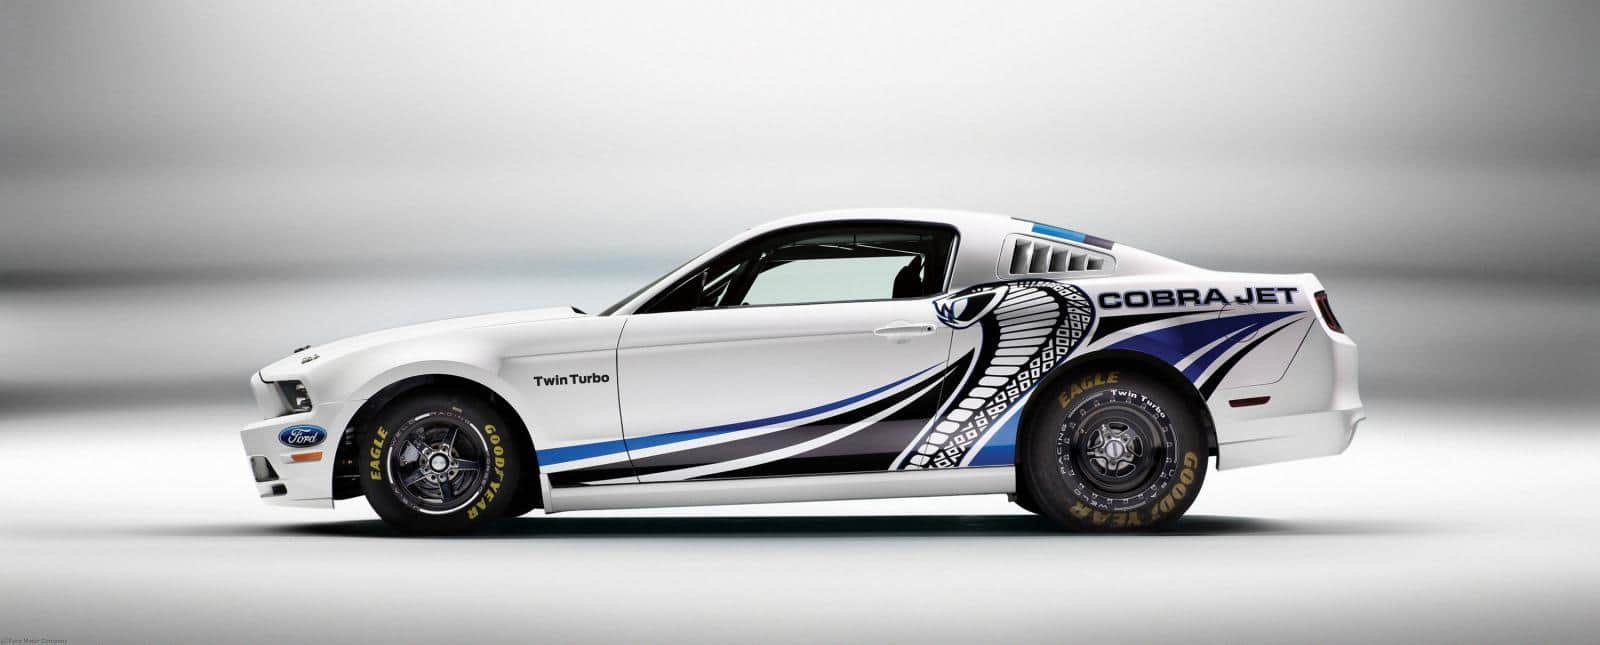 Ford Mustang Cobra Jet Concept 2